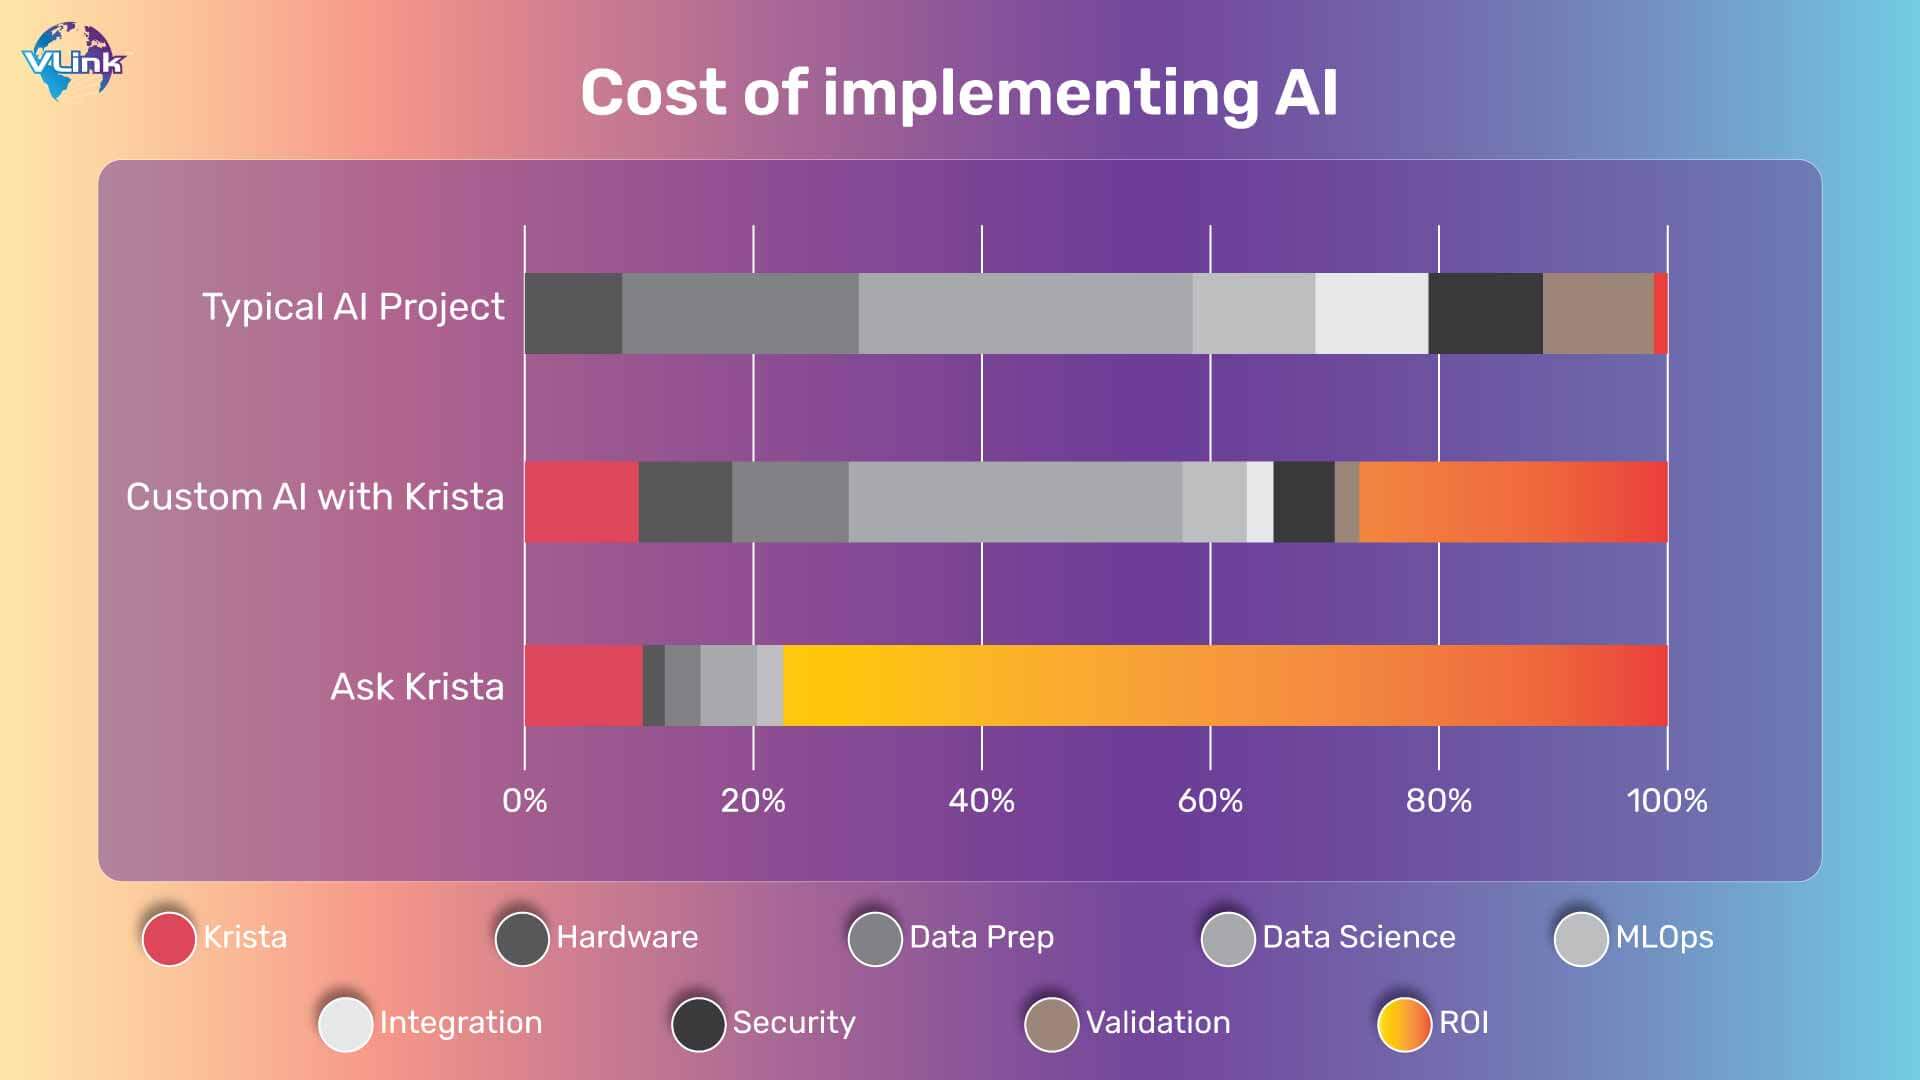 Cost of implementing AI